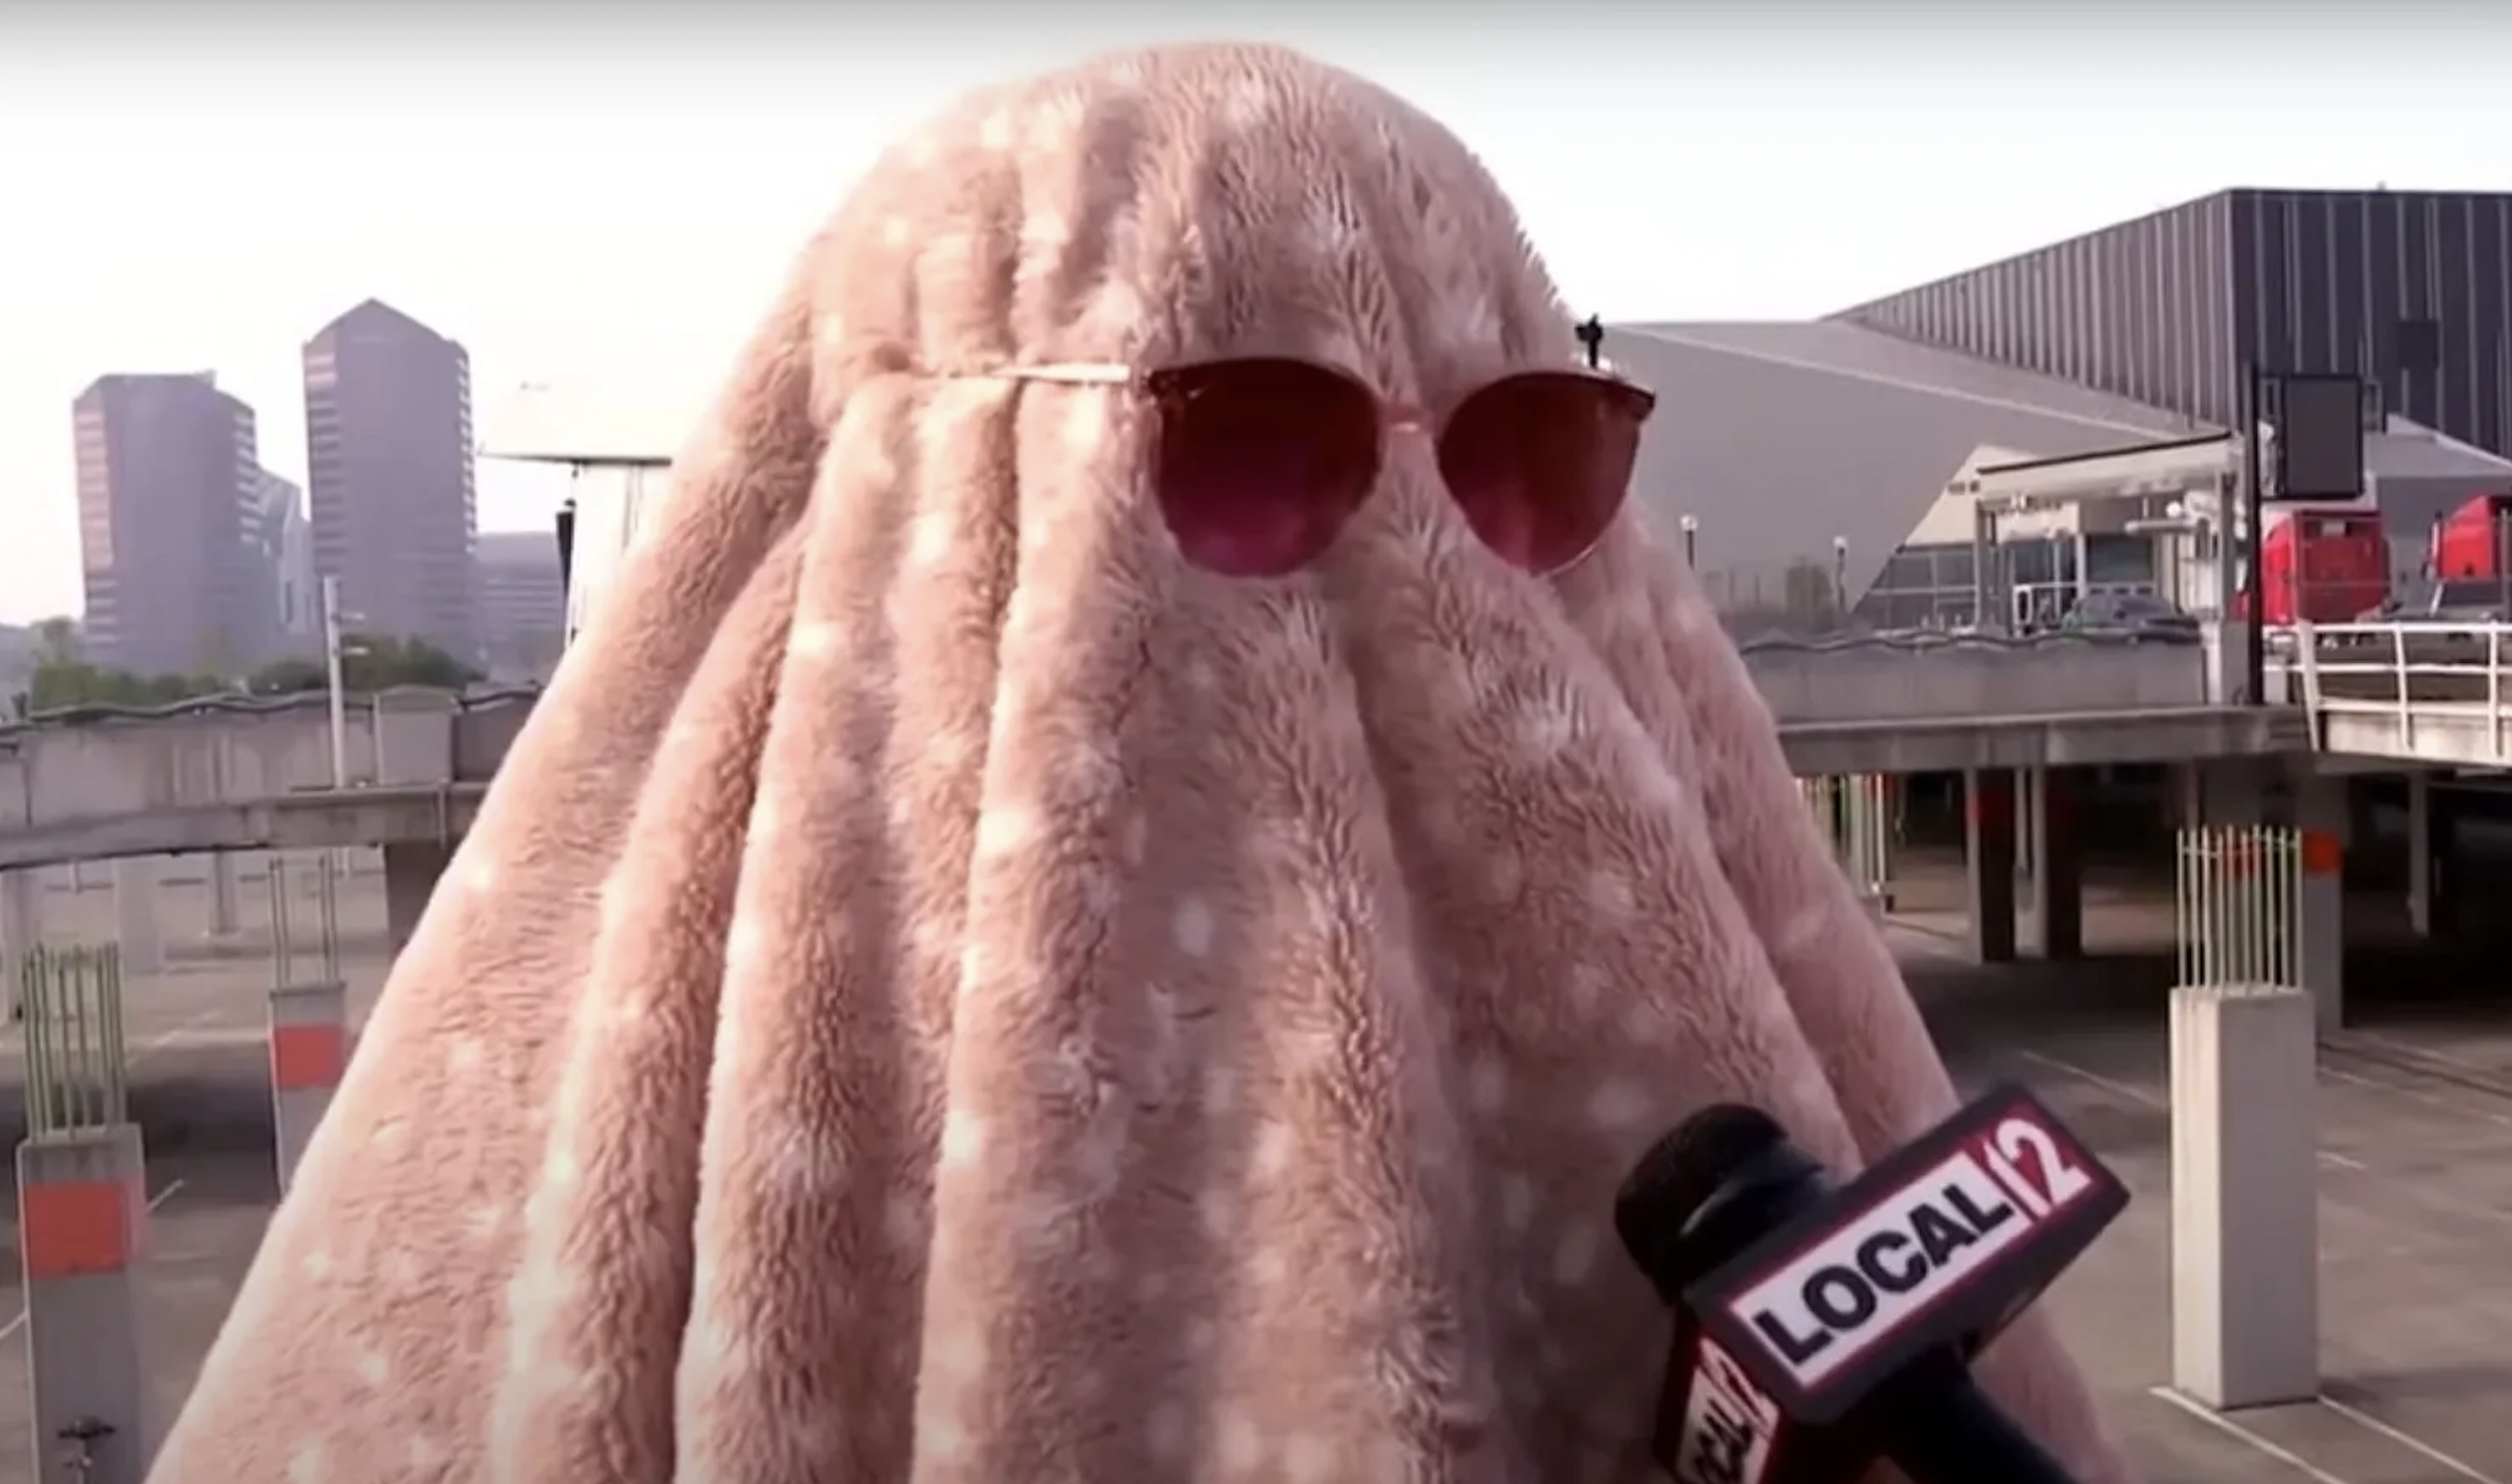 Person in a humorous blanket disguise with sunglasses giving an interview